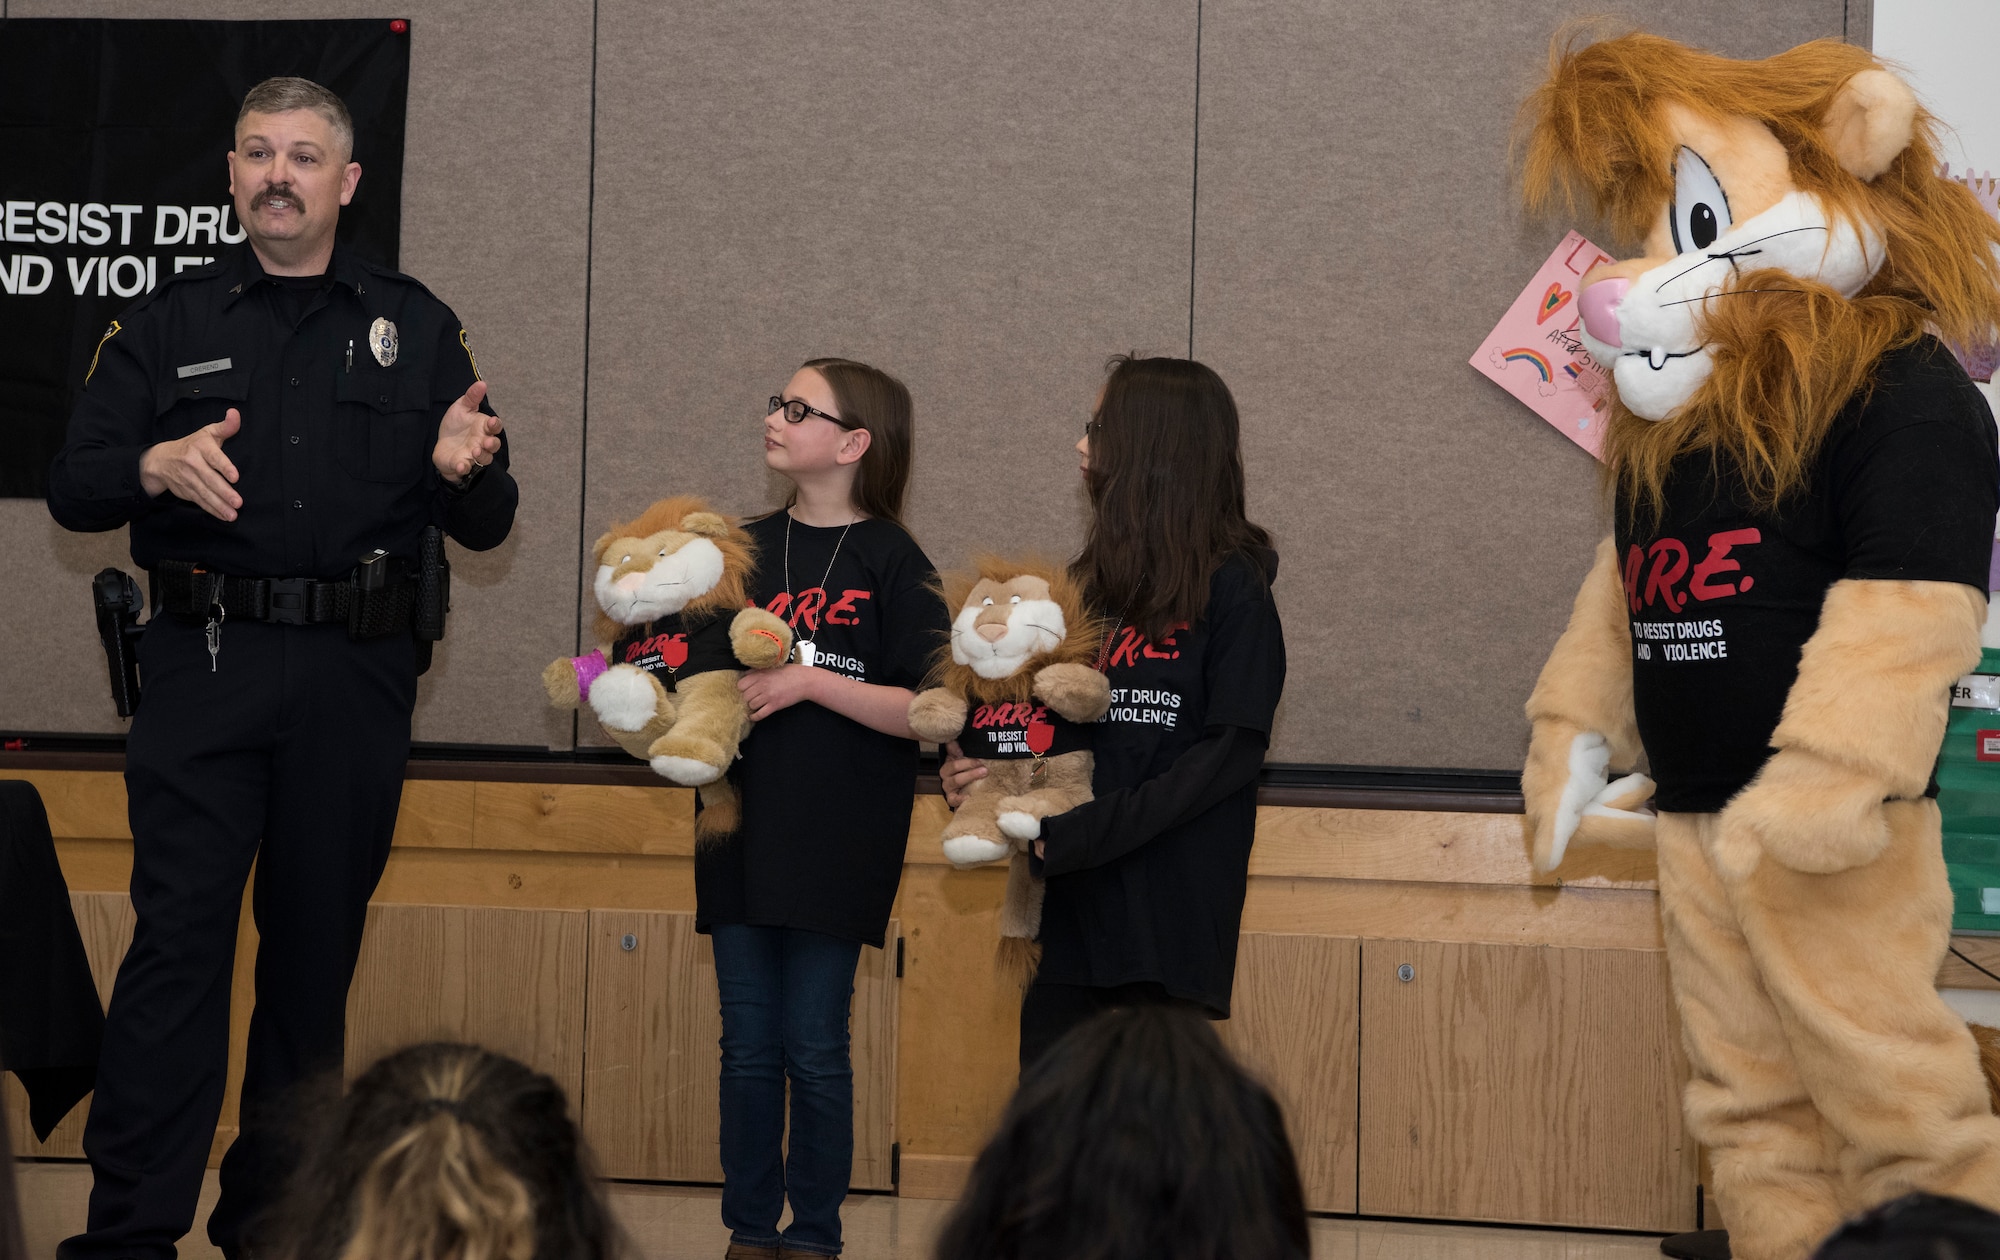 Michael J. Crerend, lead police officer with the 673d Security Forces Squadron and Drug Abuse Resistance Education officer, recognizes two students from the D.A.R.E. program for their achievements at Ursa Major Elementary School at Joint Base Elmendorf-Richardson, Alaska, May 2, 2018. D.A.R.E. is a program designed to provide students with the knowledge and tools they need to resist drugs, alcohol and other high-risk behaviors.